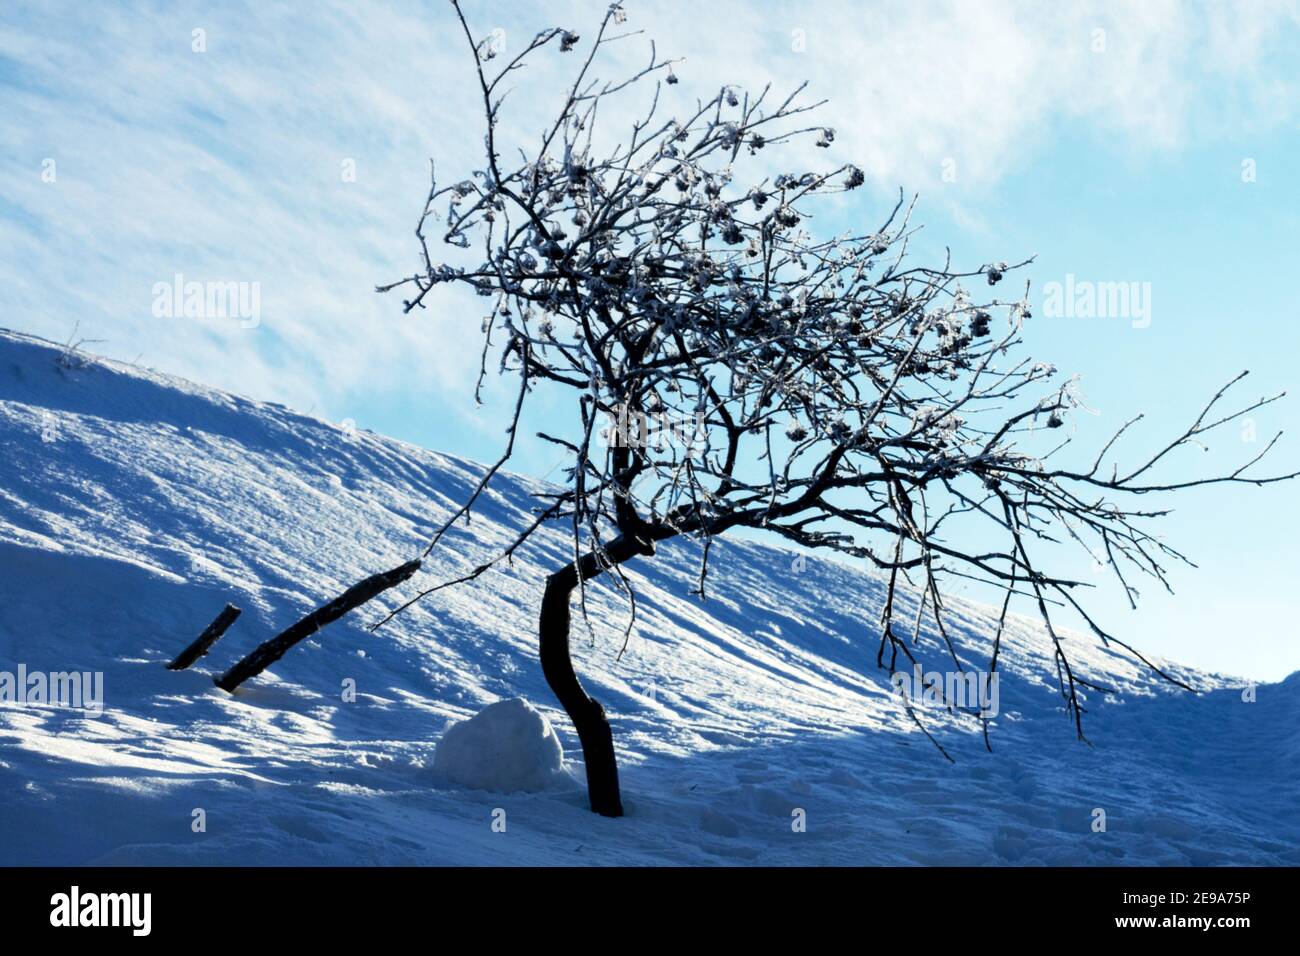 Small mountain ash tree in the snowdrift, hoar frost, snow and winter sky Stock Photo